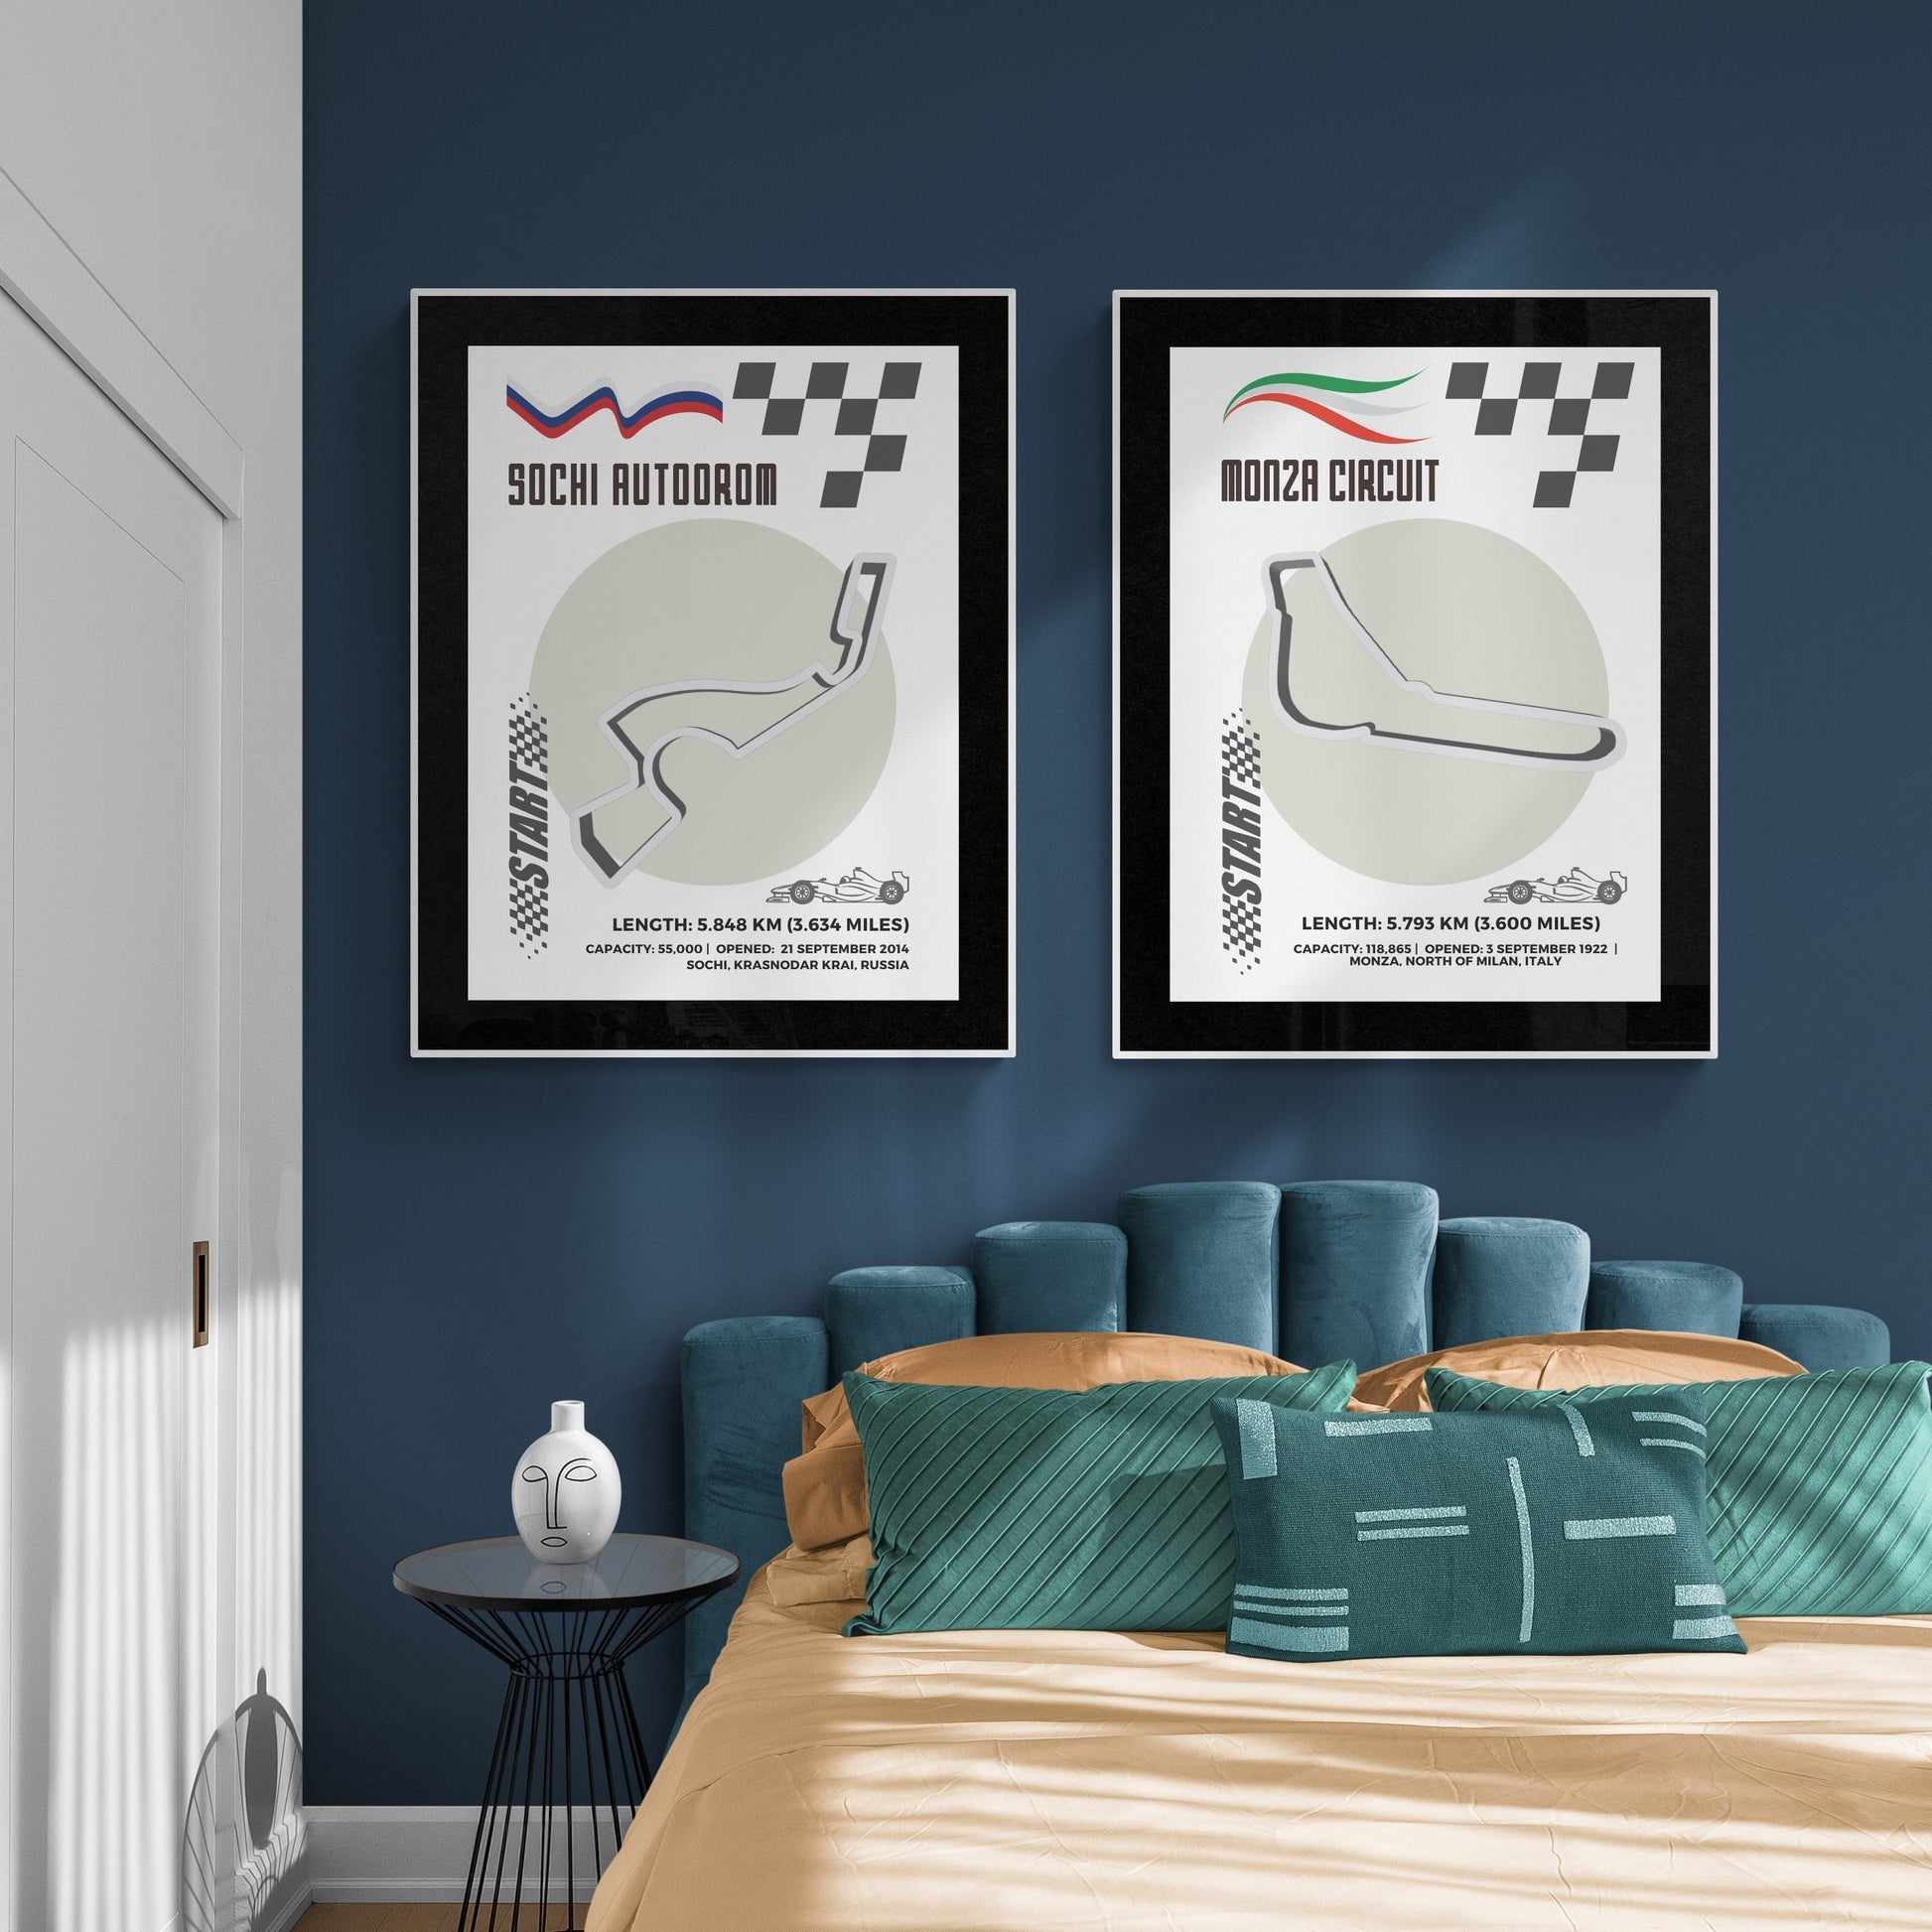 Transform any room into a Formula One fan's dream with our Barcelona Circuit F1 Posters. Made with premium, age-resistant matte paper, these posters feature detailed information on the circuit's history and notable moments. Perfect for race enthusiasts who want to bring the excitement and beauty of F1 tracks into their home.